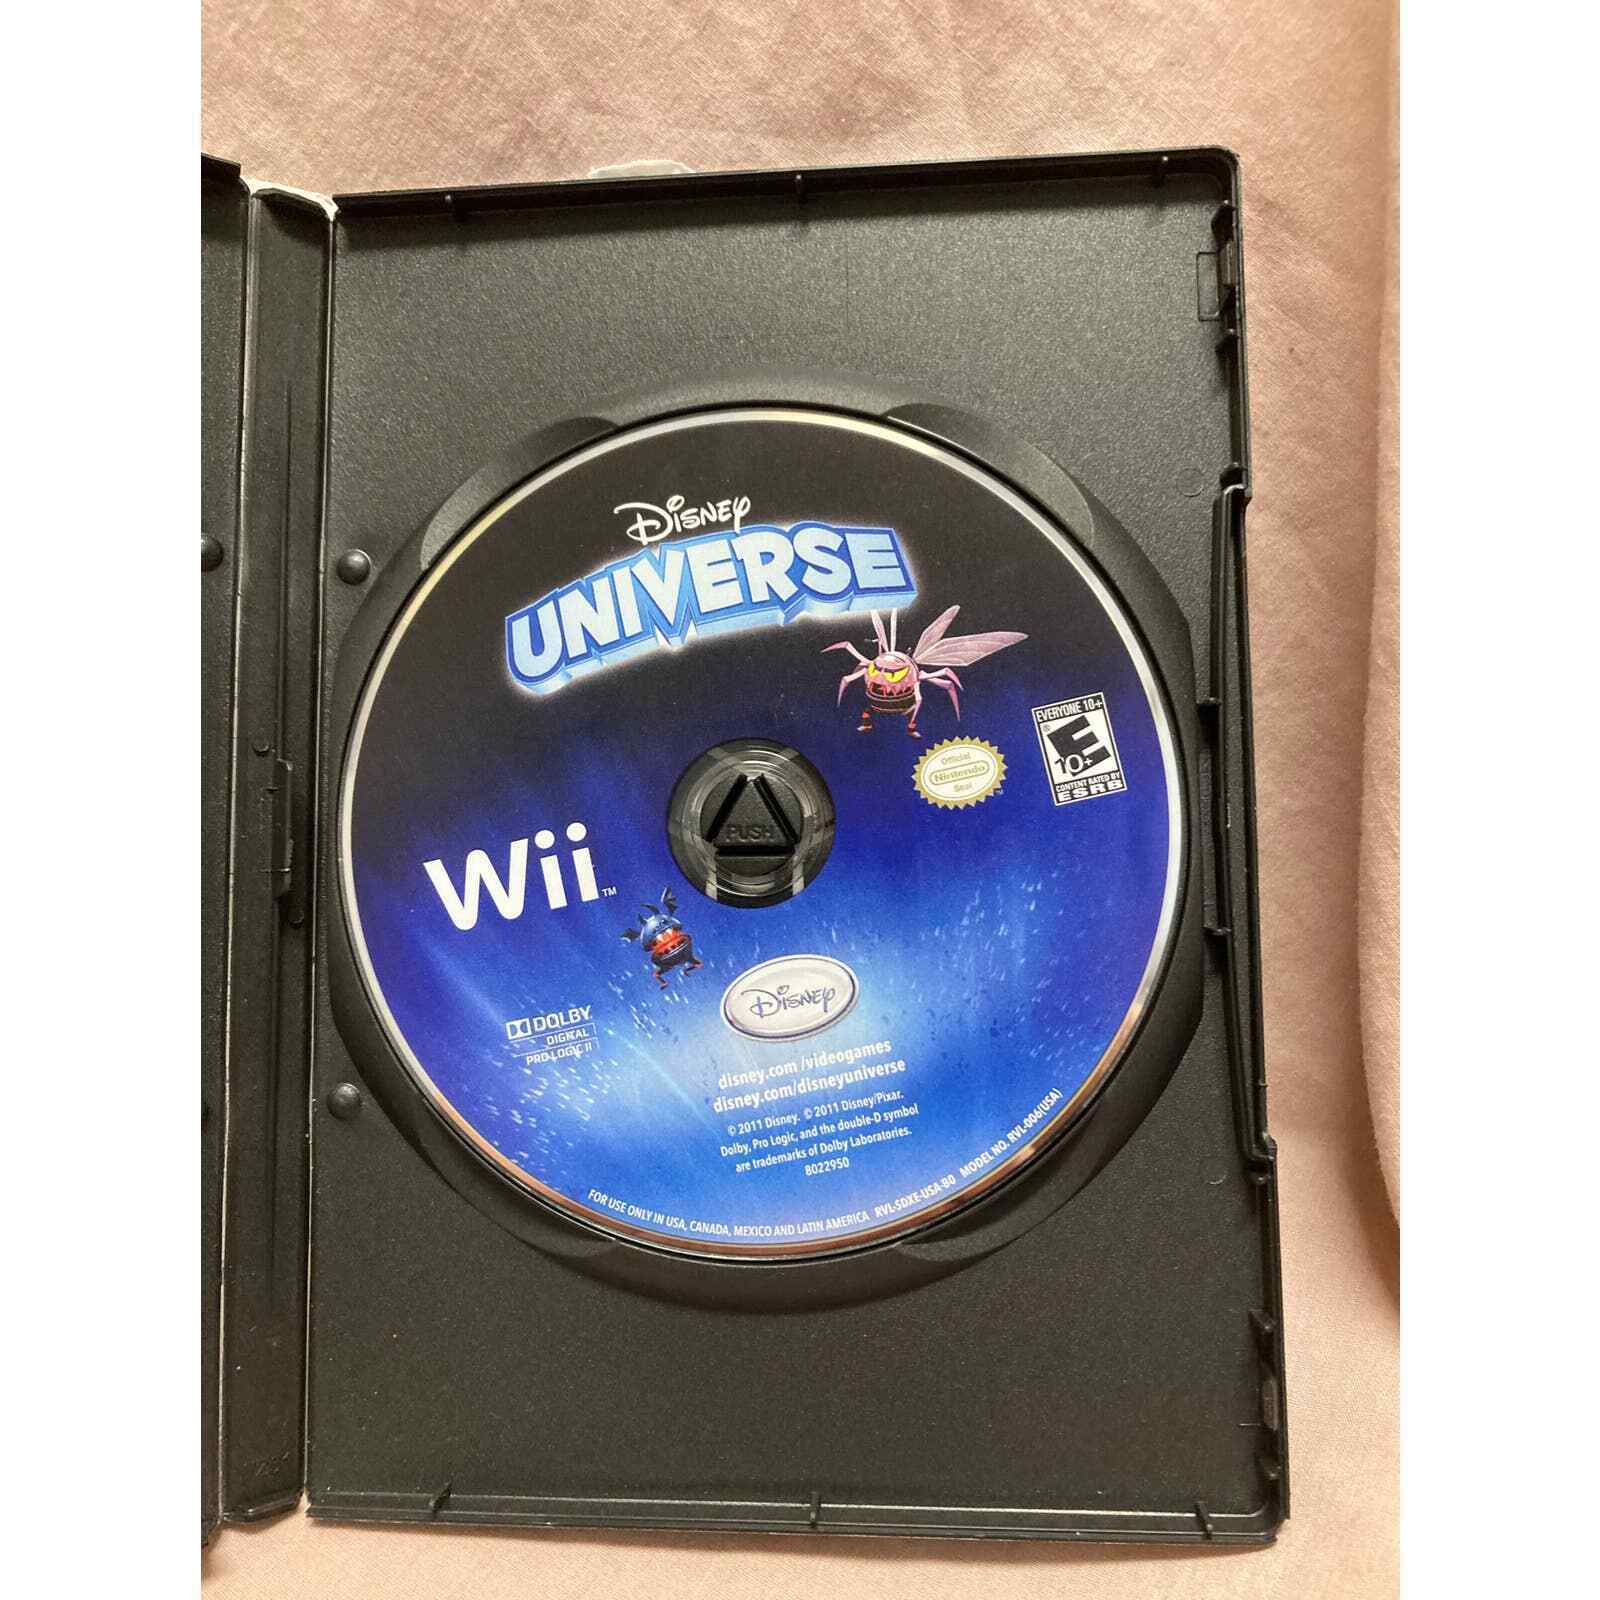 Primary image for Disney Universe - Nintendo Wii - Disc Only - Tested